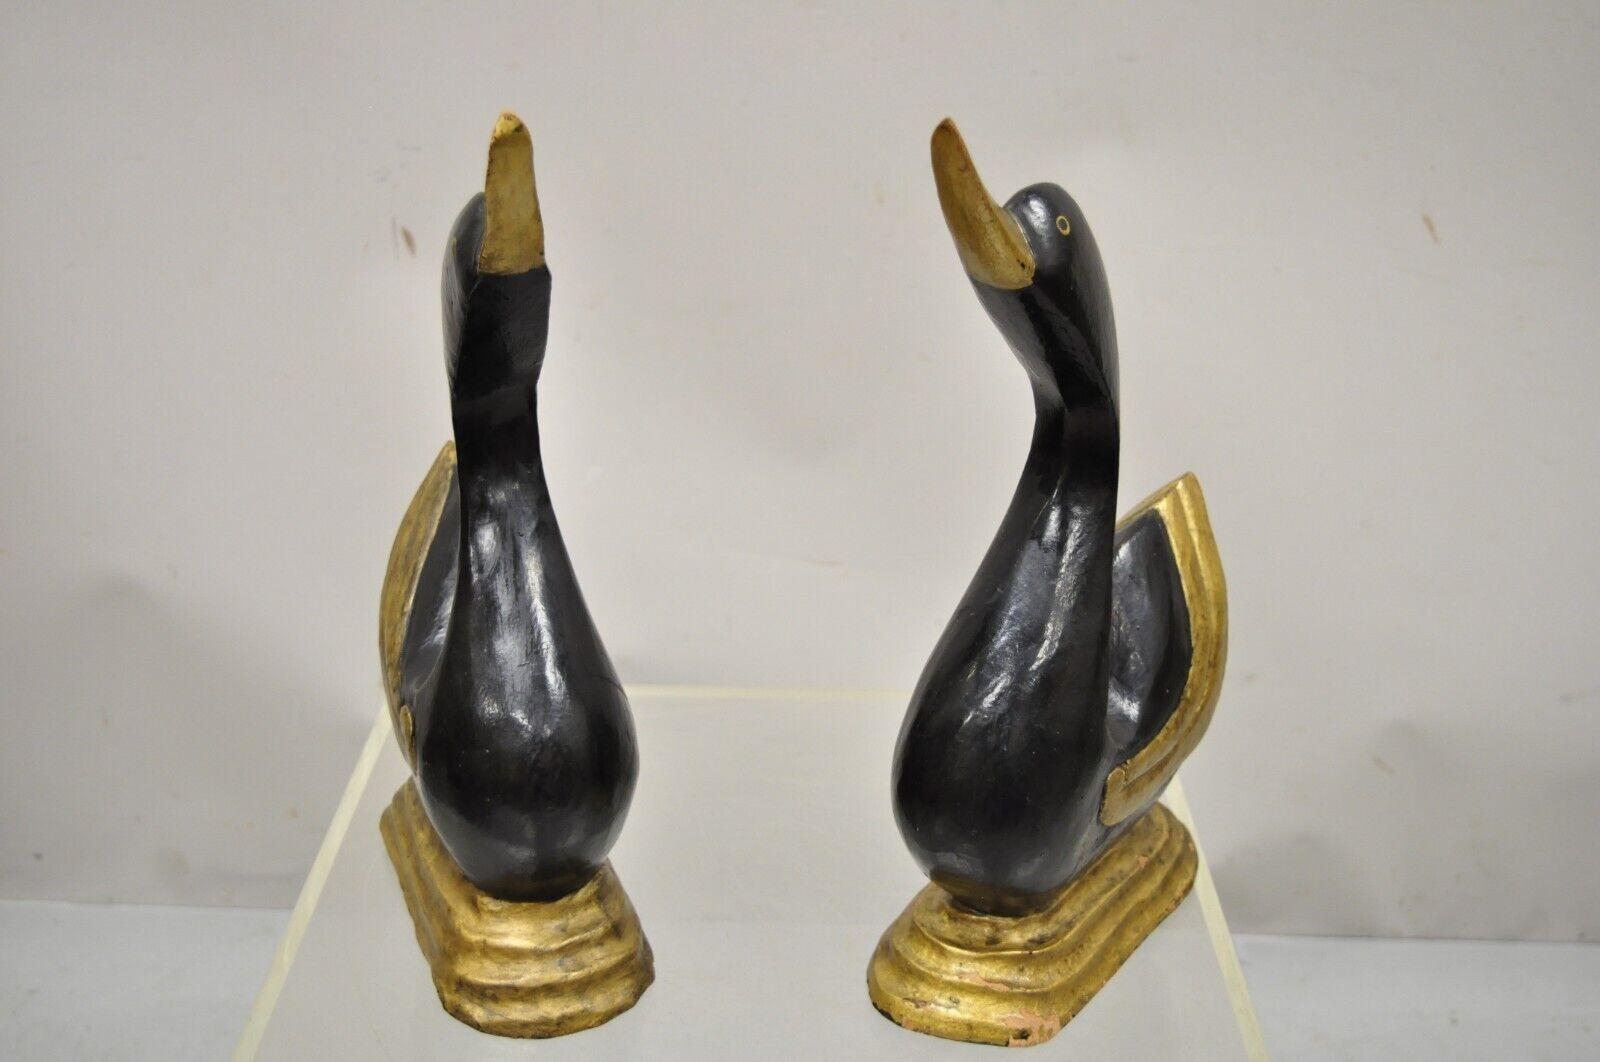 Vintage Carved Wood Art Deco Style Black Gold Duck Goose Figures, a Pair 1